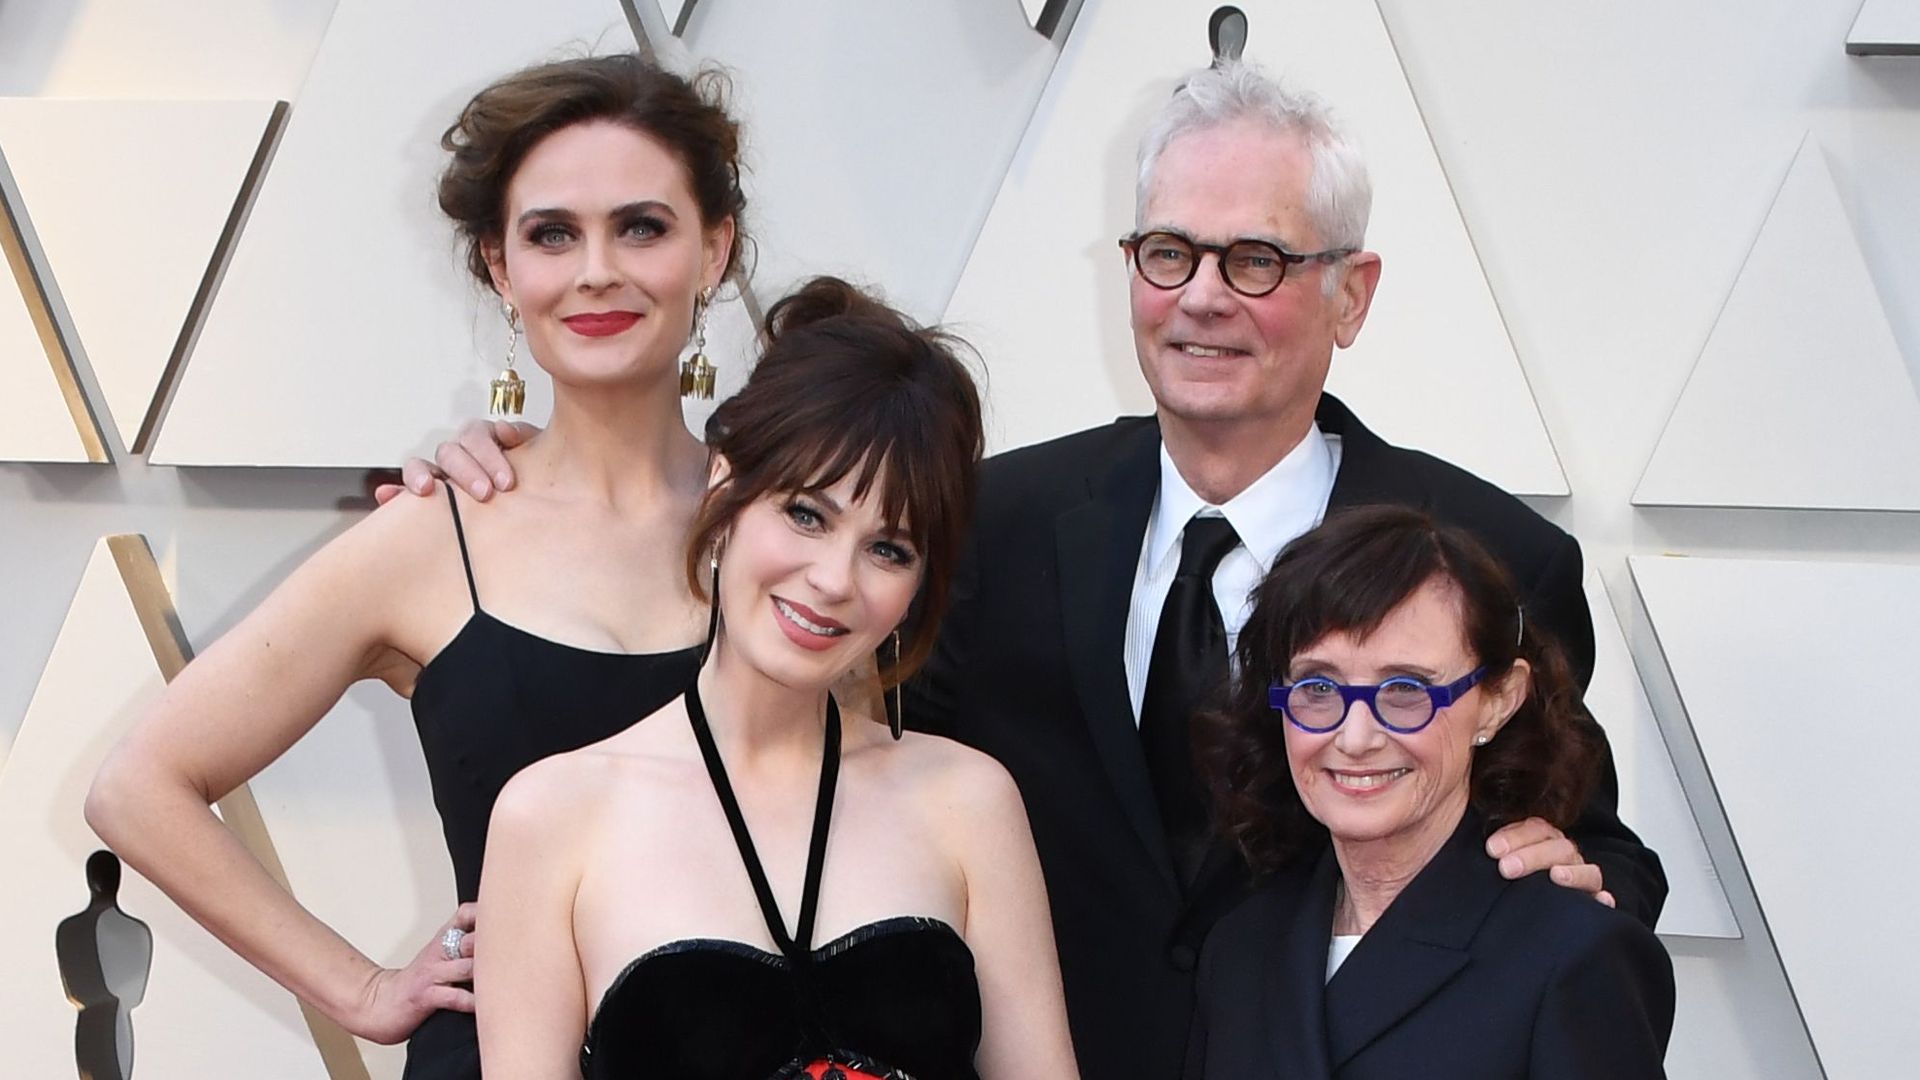 Emily Deschanel, Zooey Deschanel, Best Cinematography nominee for "Never Look Away" Caleb Deschanel, and wife actress Mary Jo Deschanel arrive for the 91st Annual Academy Awards at the Dolby Theatre in Hollywood, California on February 24, 2019